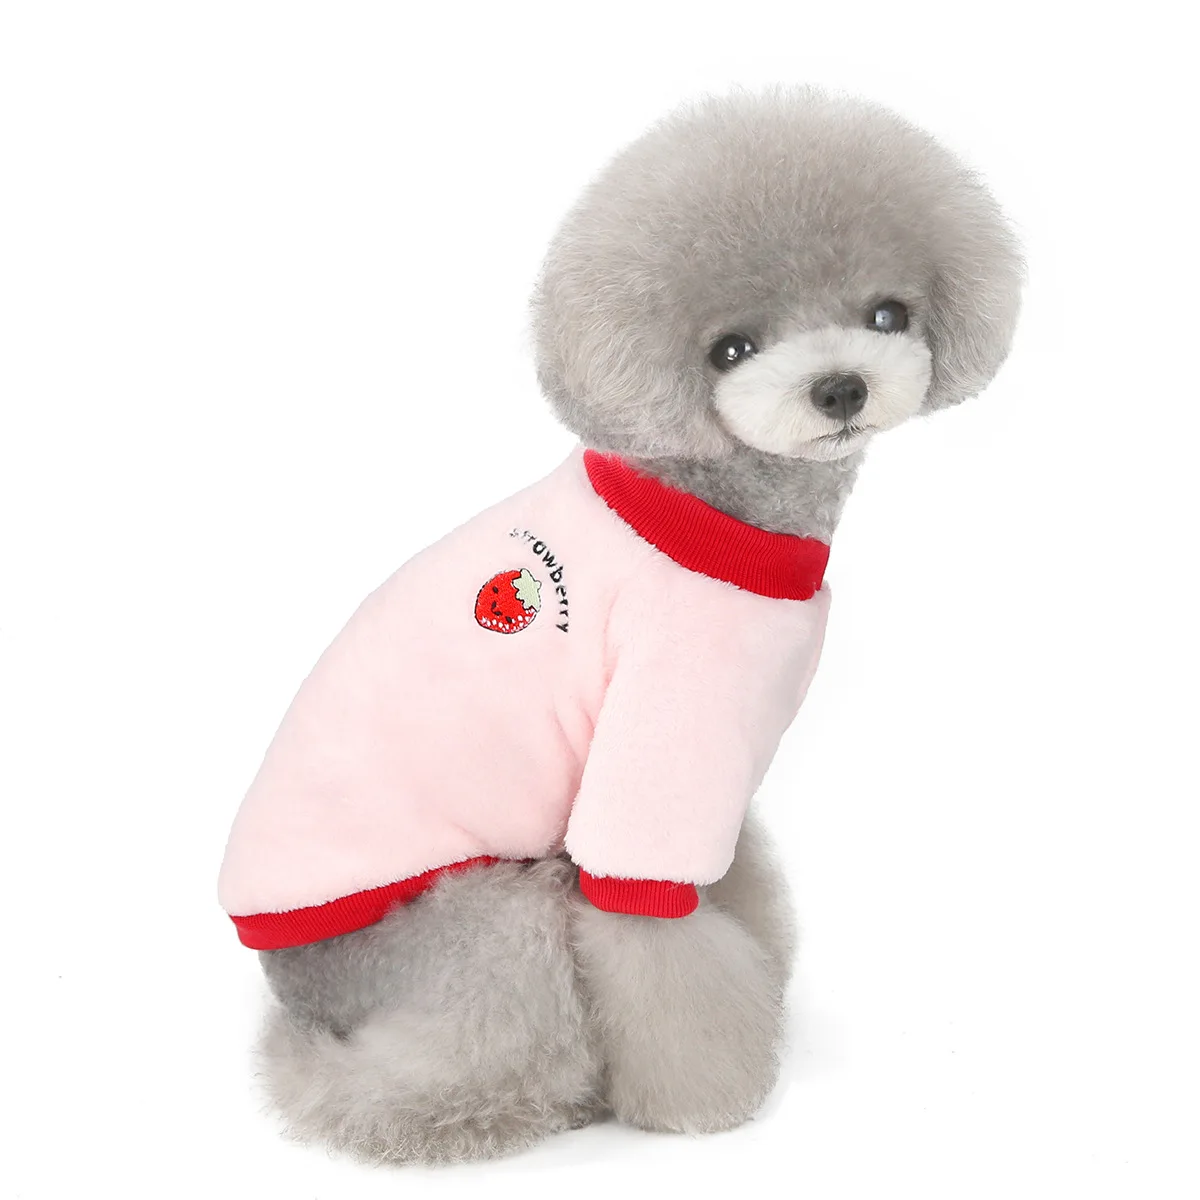 

New Arrival Winter Warm Puppy Clothes Happy 2 Legs Solid Color Embroidered Fruit Pattern Pet Fuzzy Jacket, Picture shows